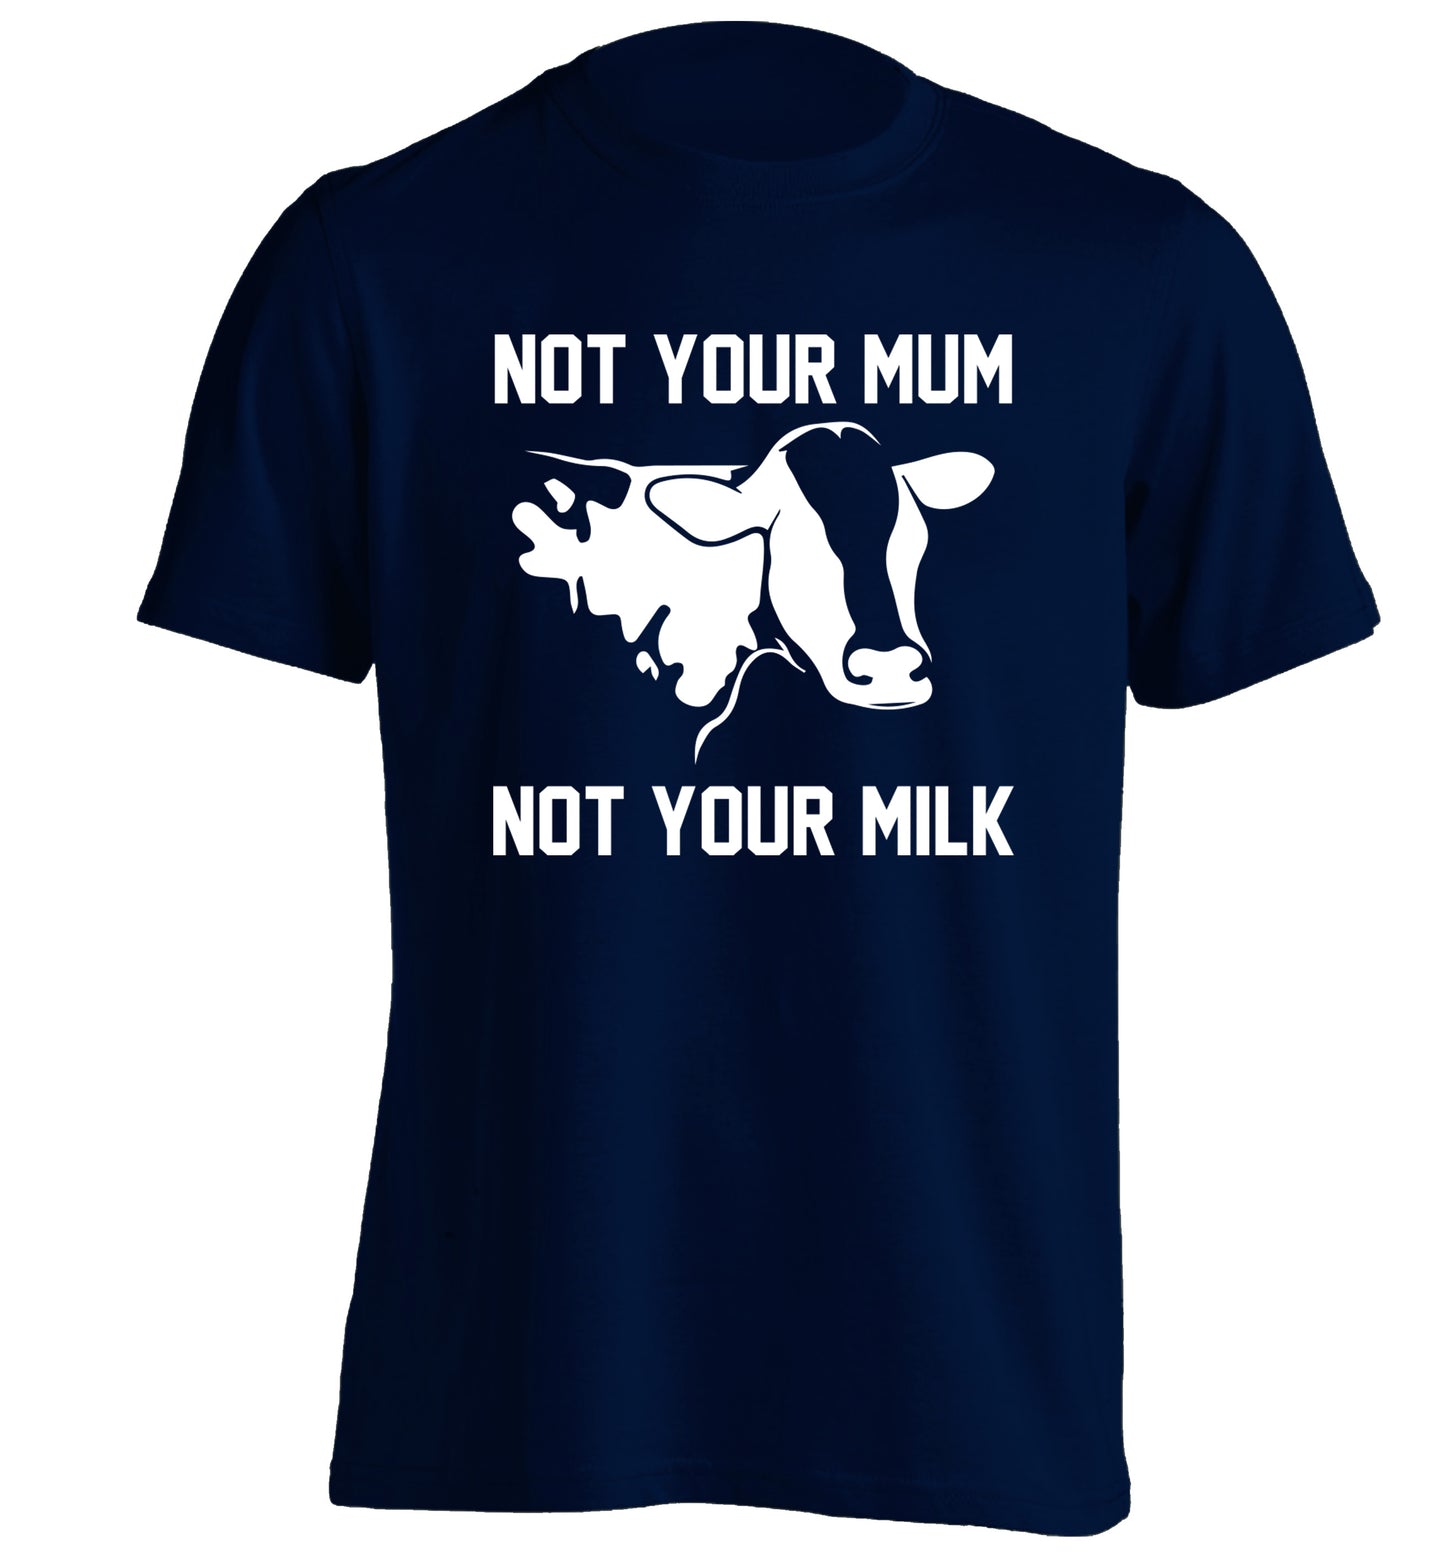 Not your mum not your milk adults unisex navy Tshirt 2XL